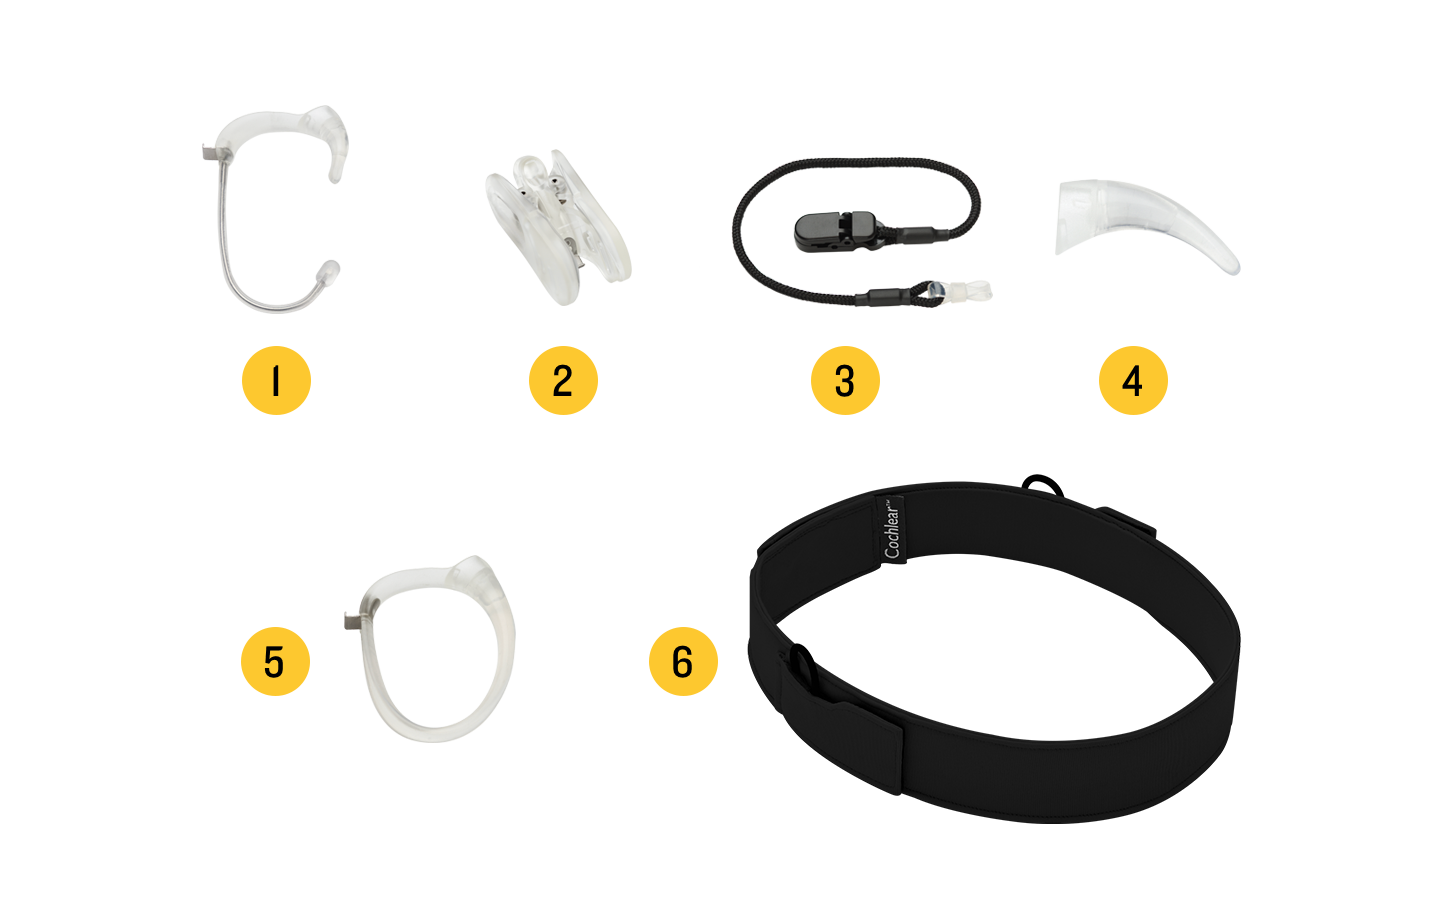 Image of the accessories for the Nucleus 8 Sound Processor: 1. Snugfit, 2. Koala Clip, 3. Safety Cord, 4. Earhook